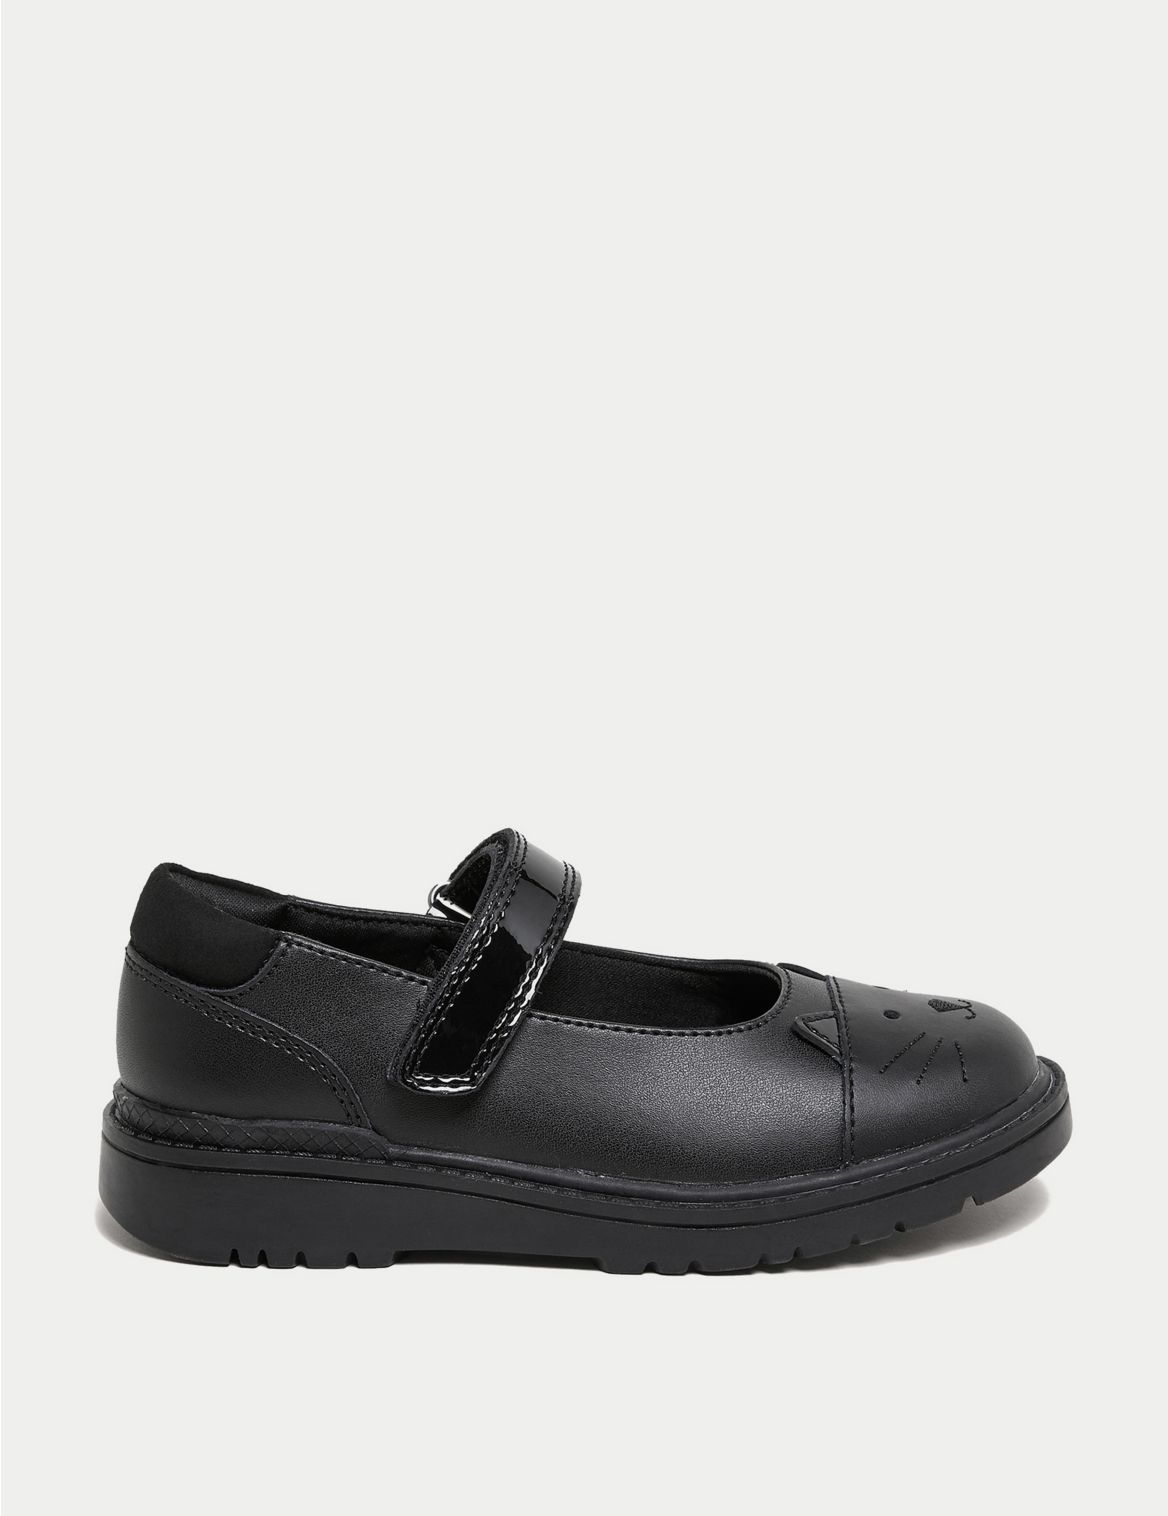 Kids' Leather Mary Jane School Shoes (8 Small - 1 Large) black